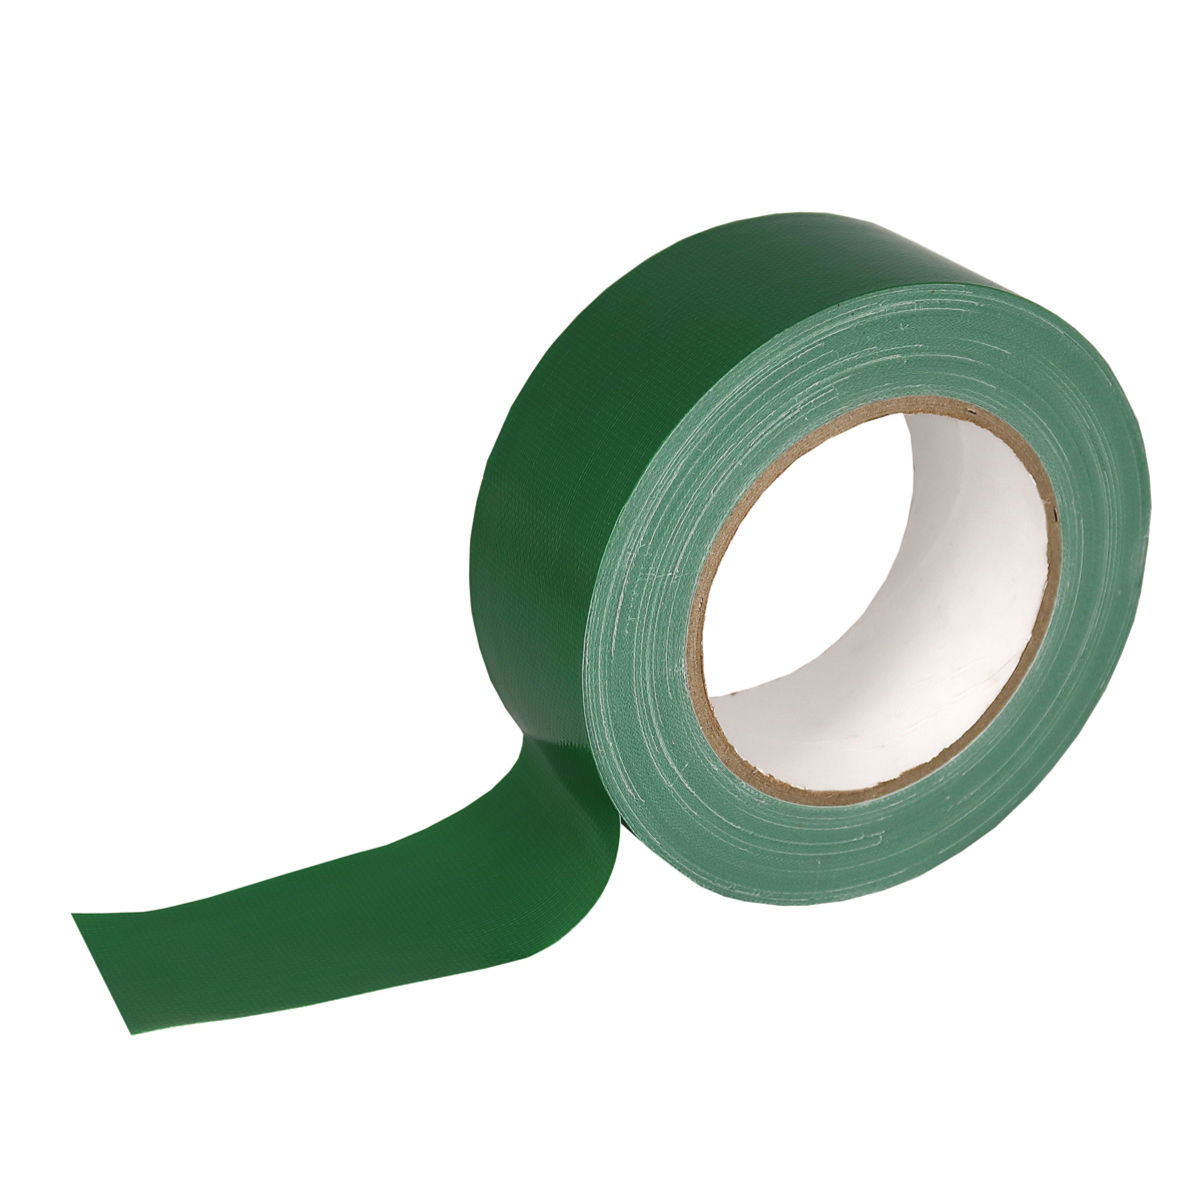 periodieke Lol Dictatuur Duct tape - Duct tape: Select Quality Premium Duct Tape - Groen